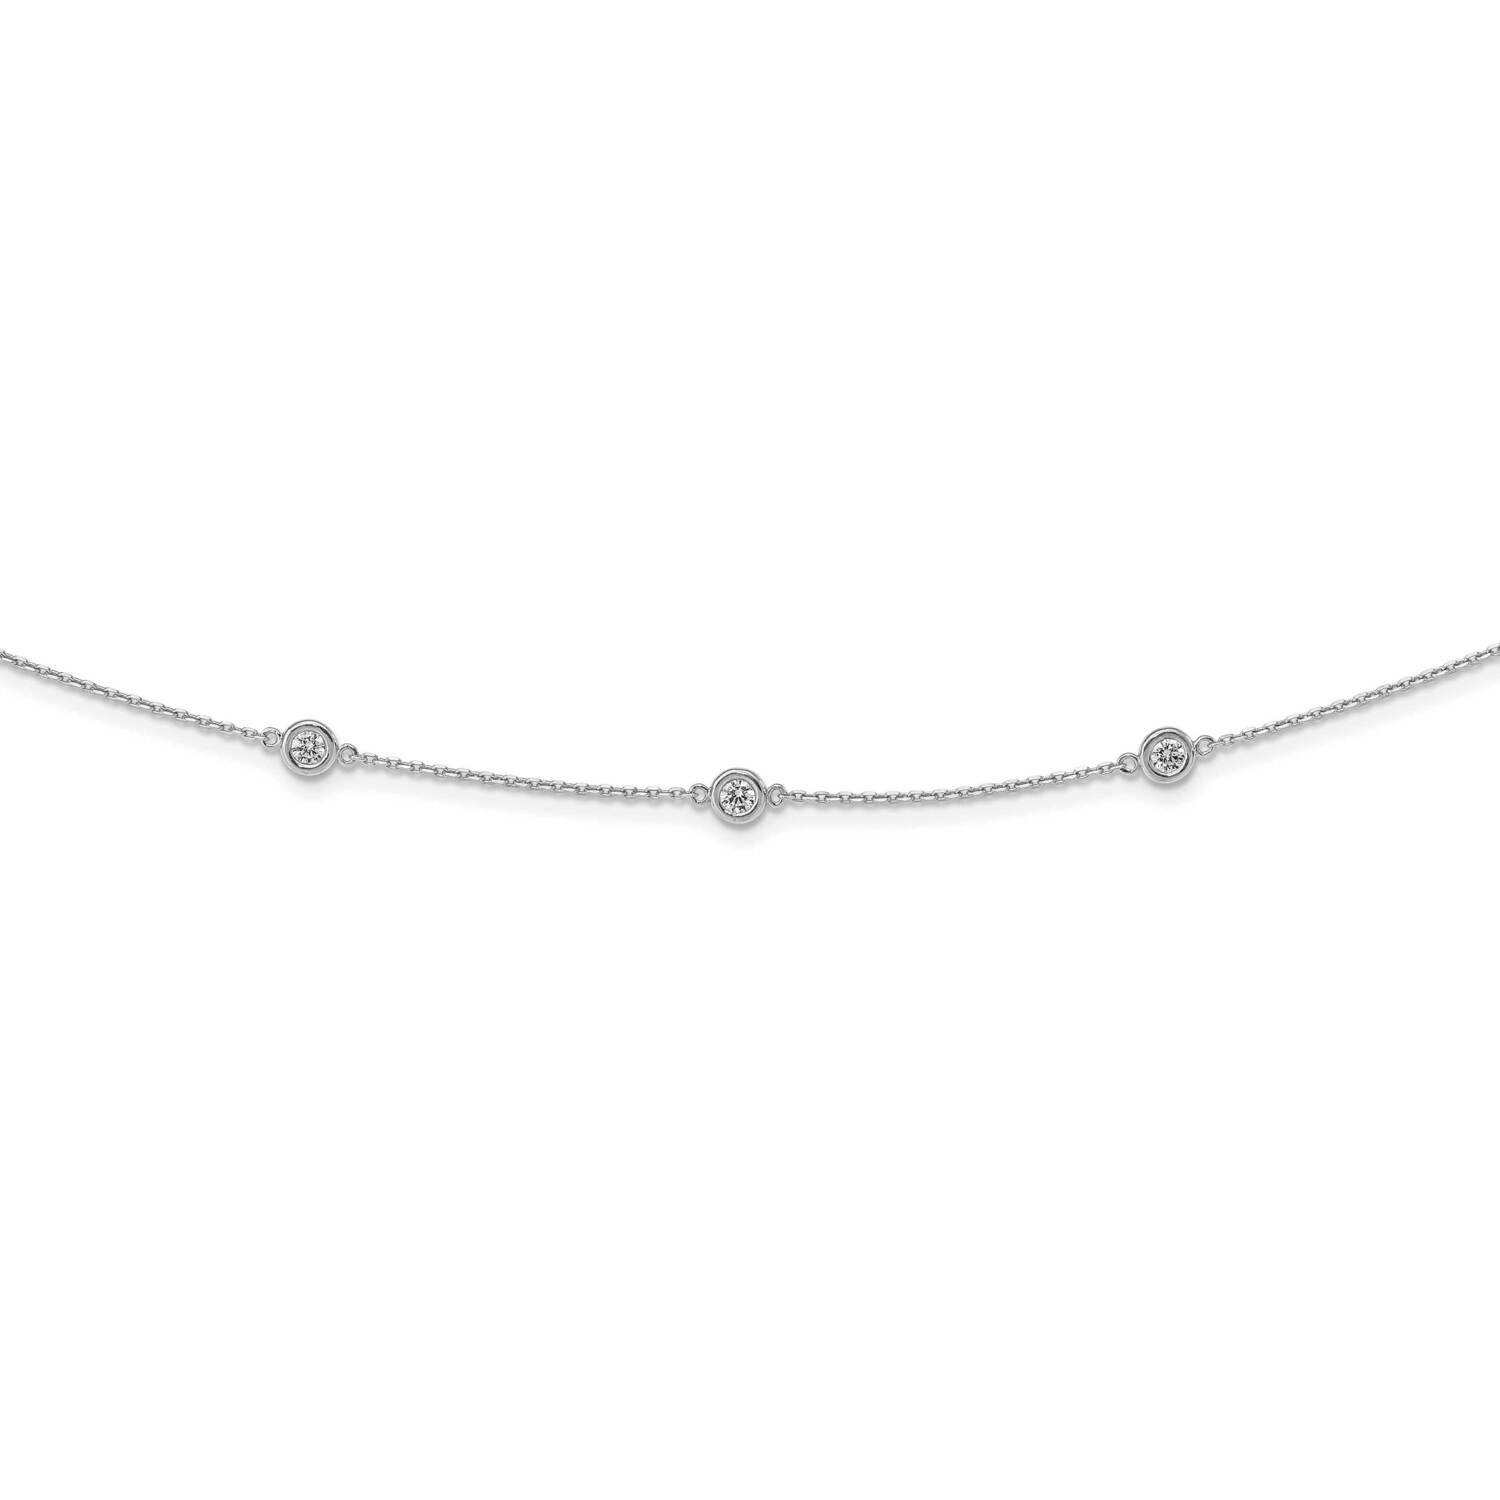 15 Station Cz 24 Inch Necklace Sterling Silver QG5633-24